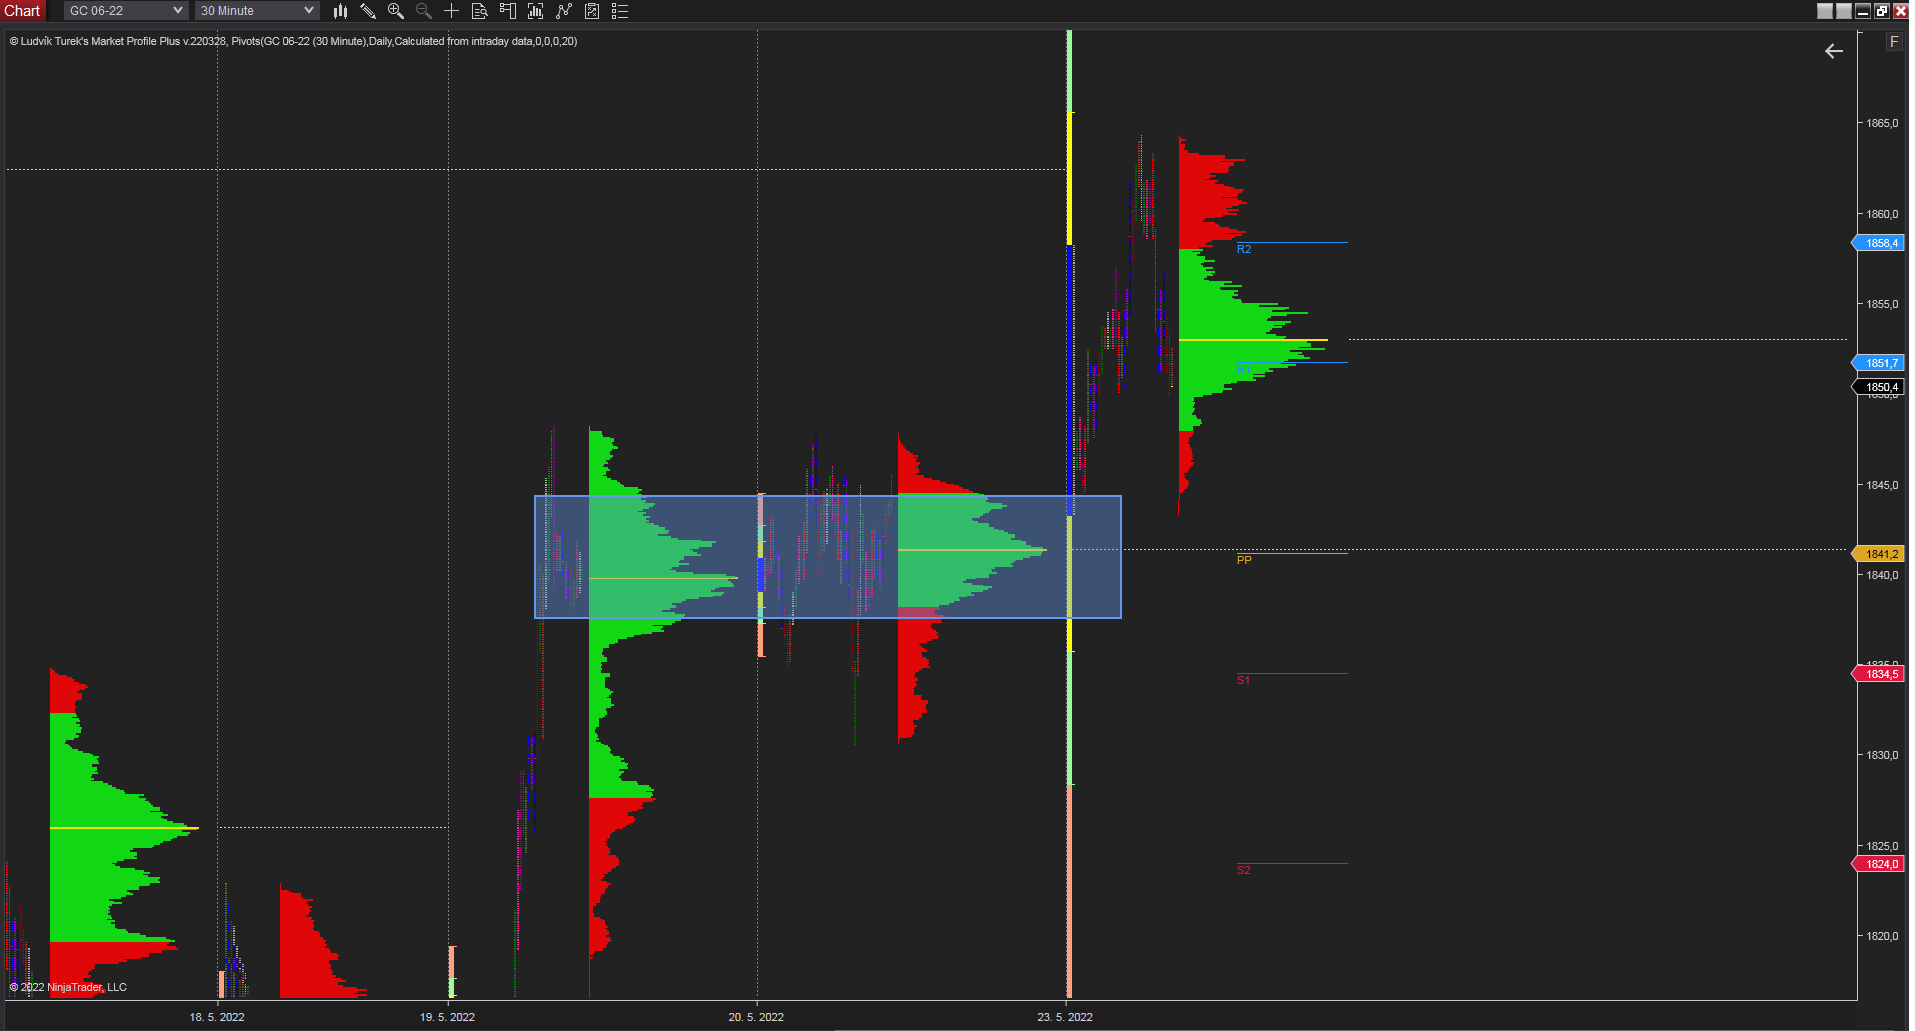 30 minutes chart of GC, Daily market profile. Source: Author's analysis